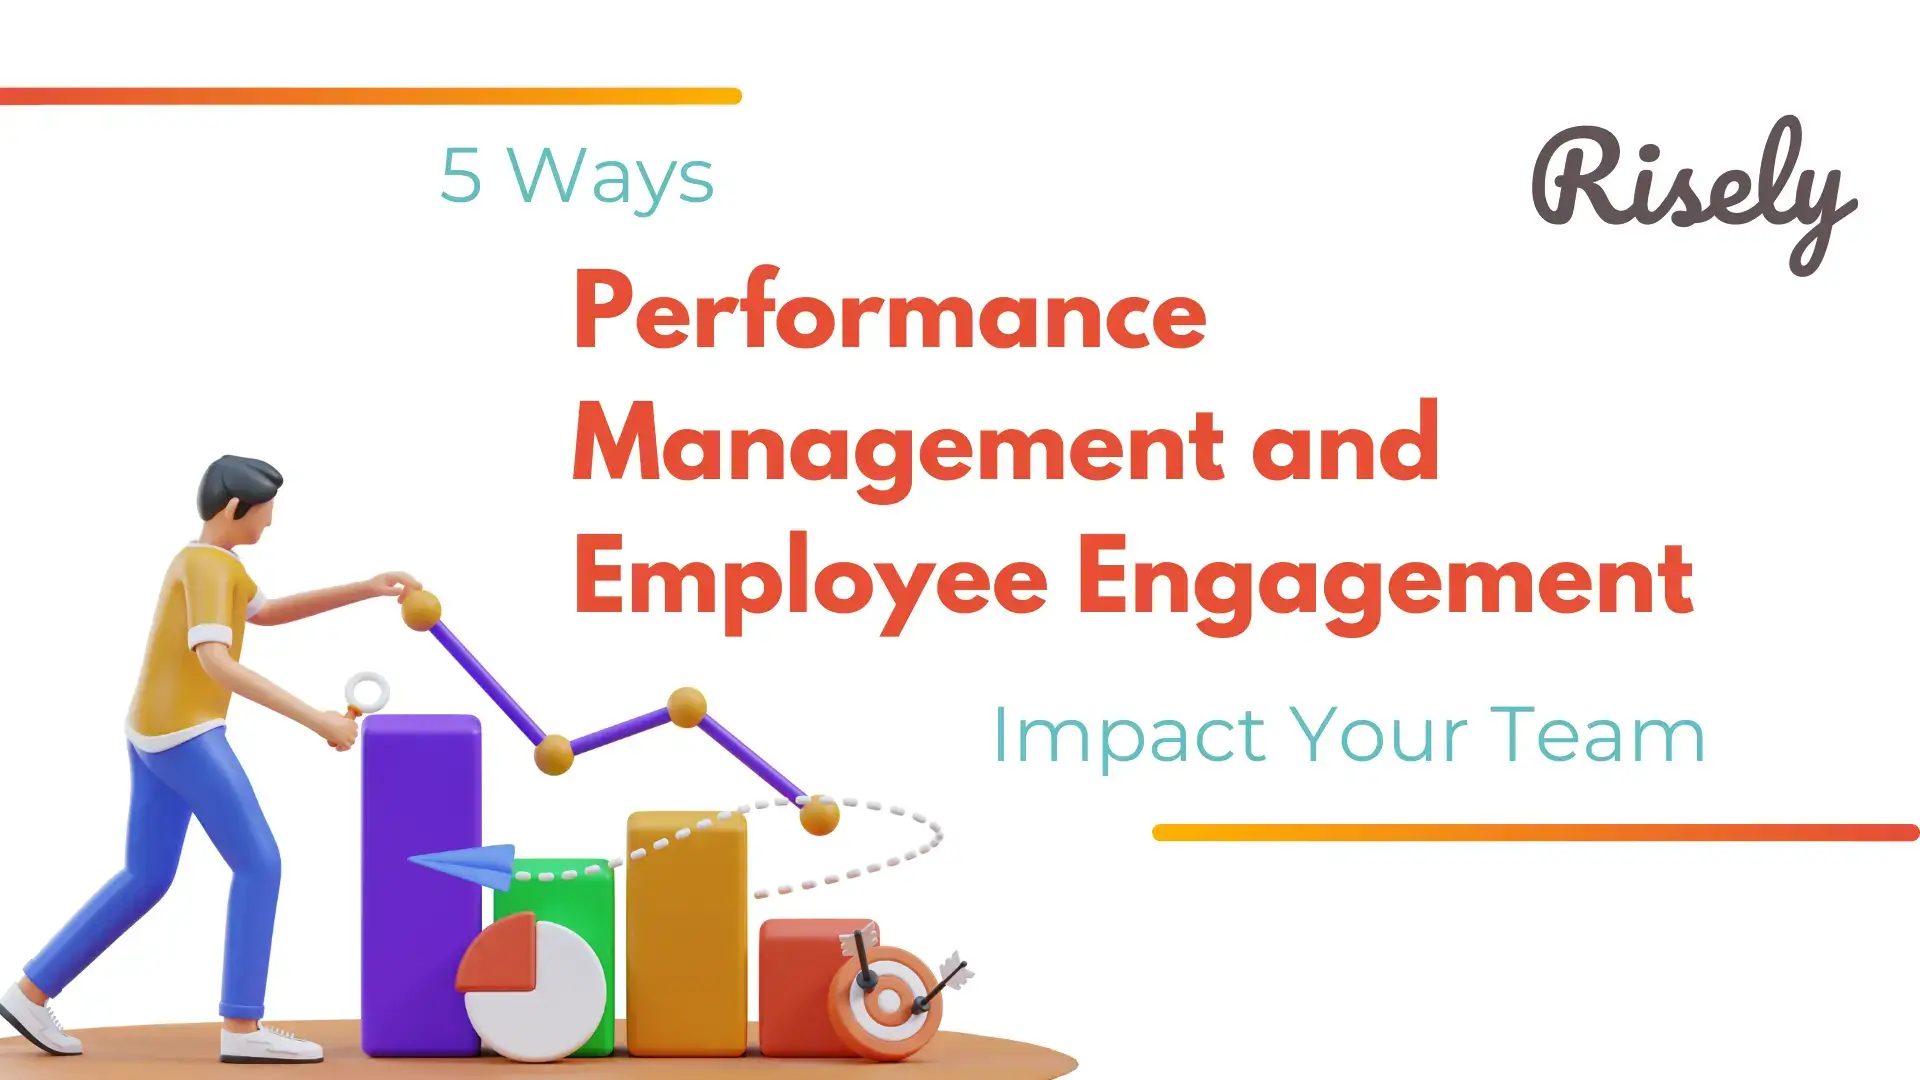 5 Ways Performance Management and Employee Engagement Impact Your Team